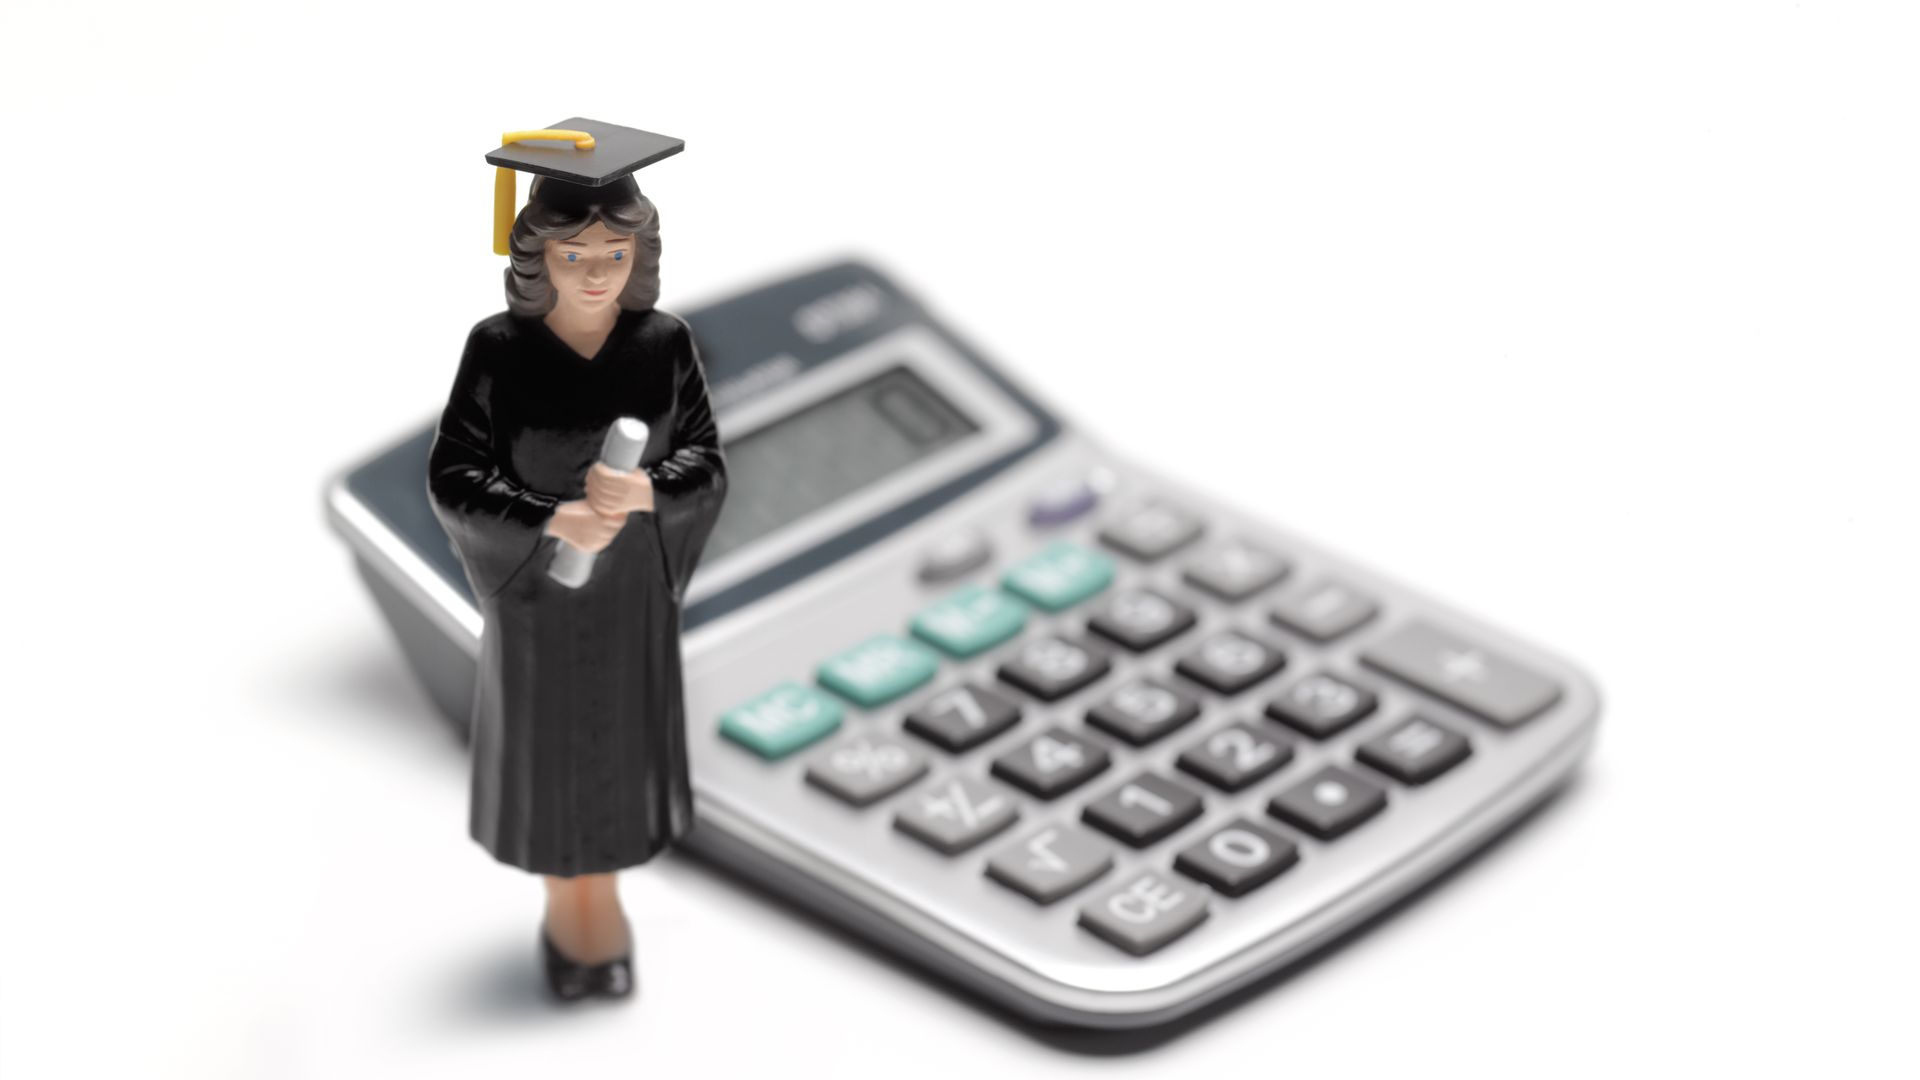 Student figurine in a graduation cap and gown standing next to a calculator  